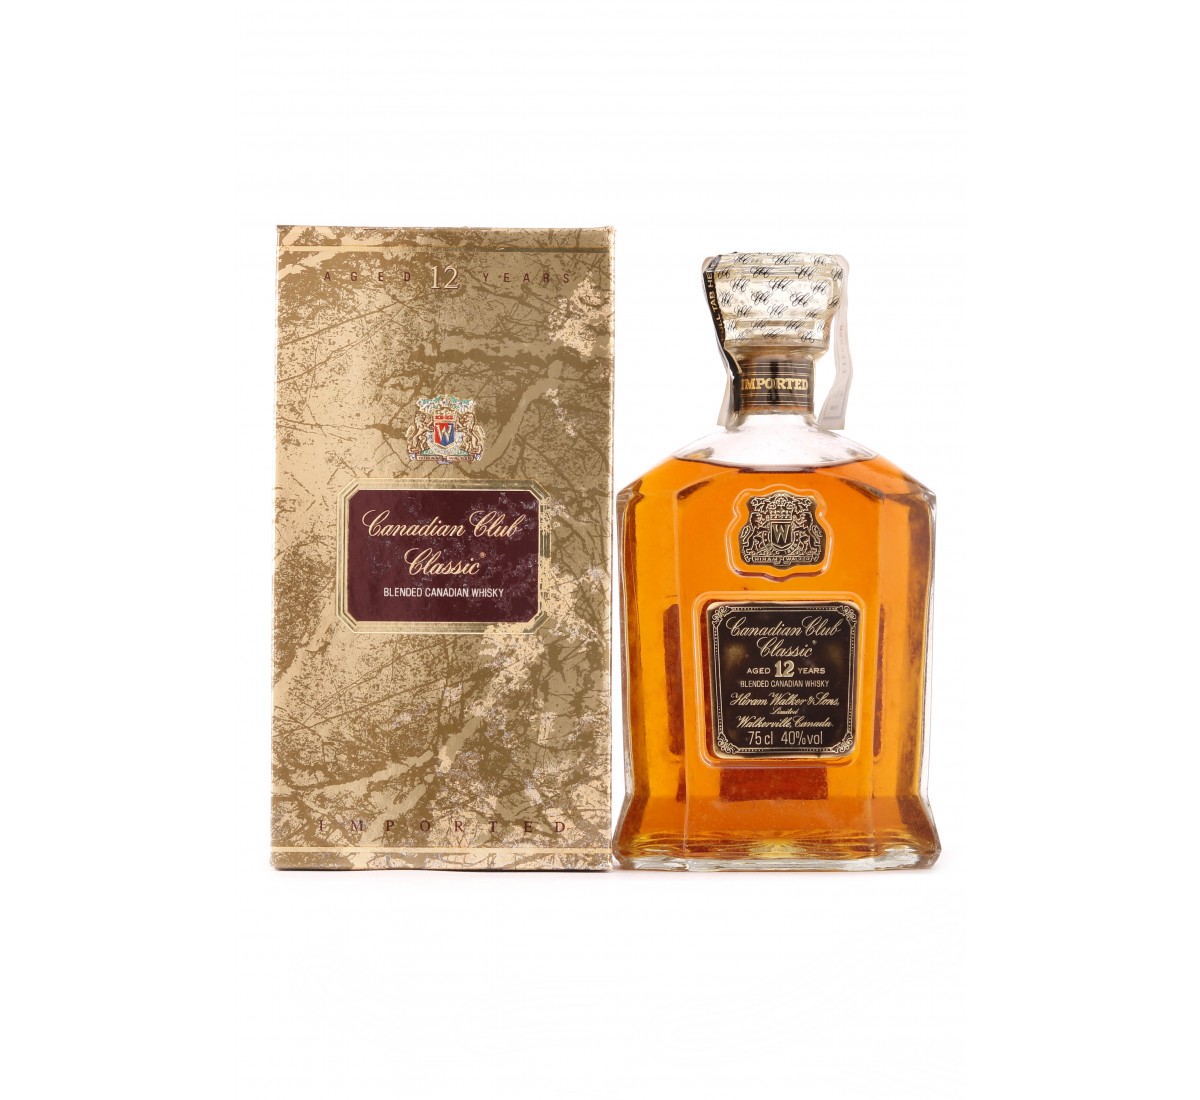 CANADIAN CLUB CLASSIC, Aged 12 Years